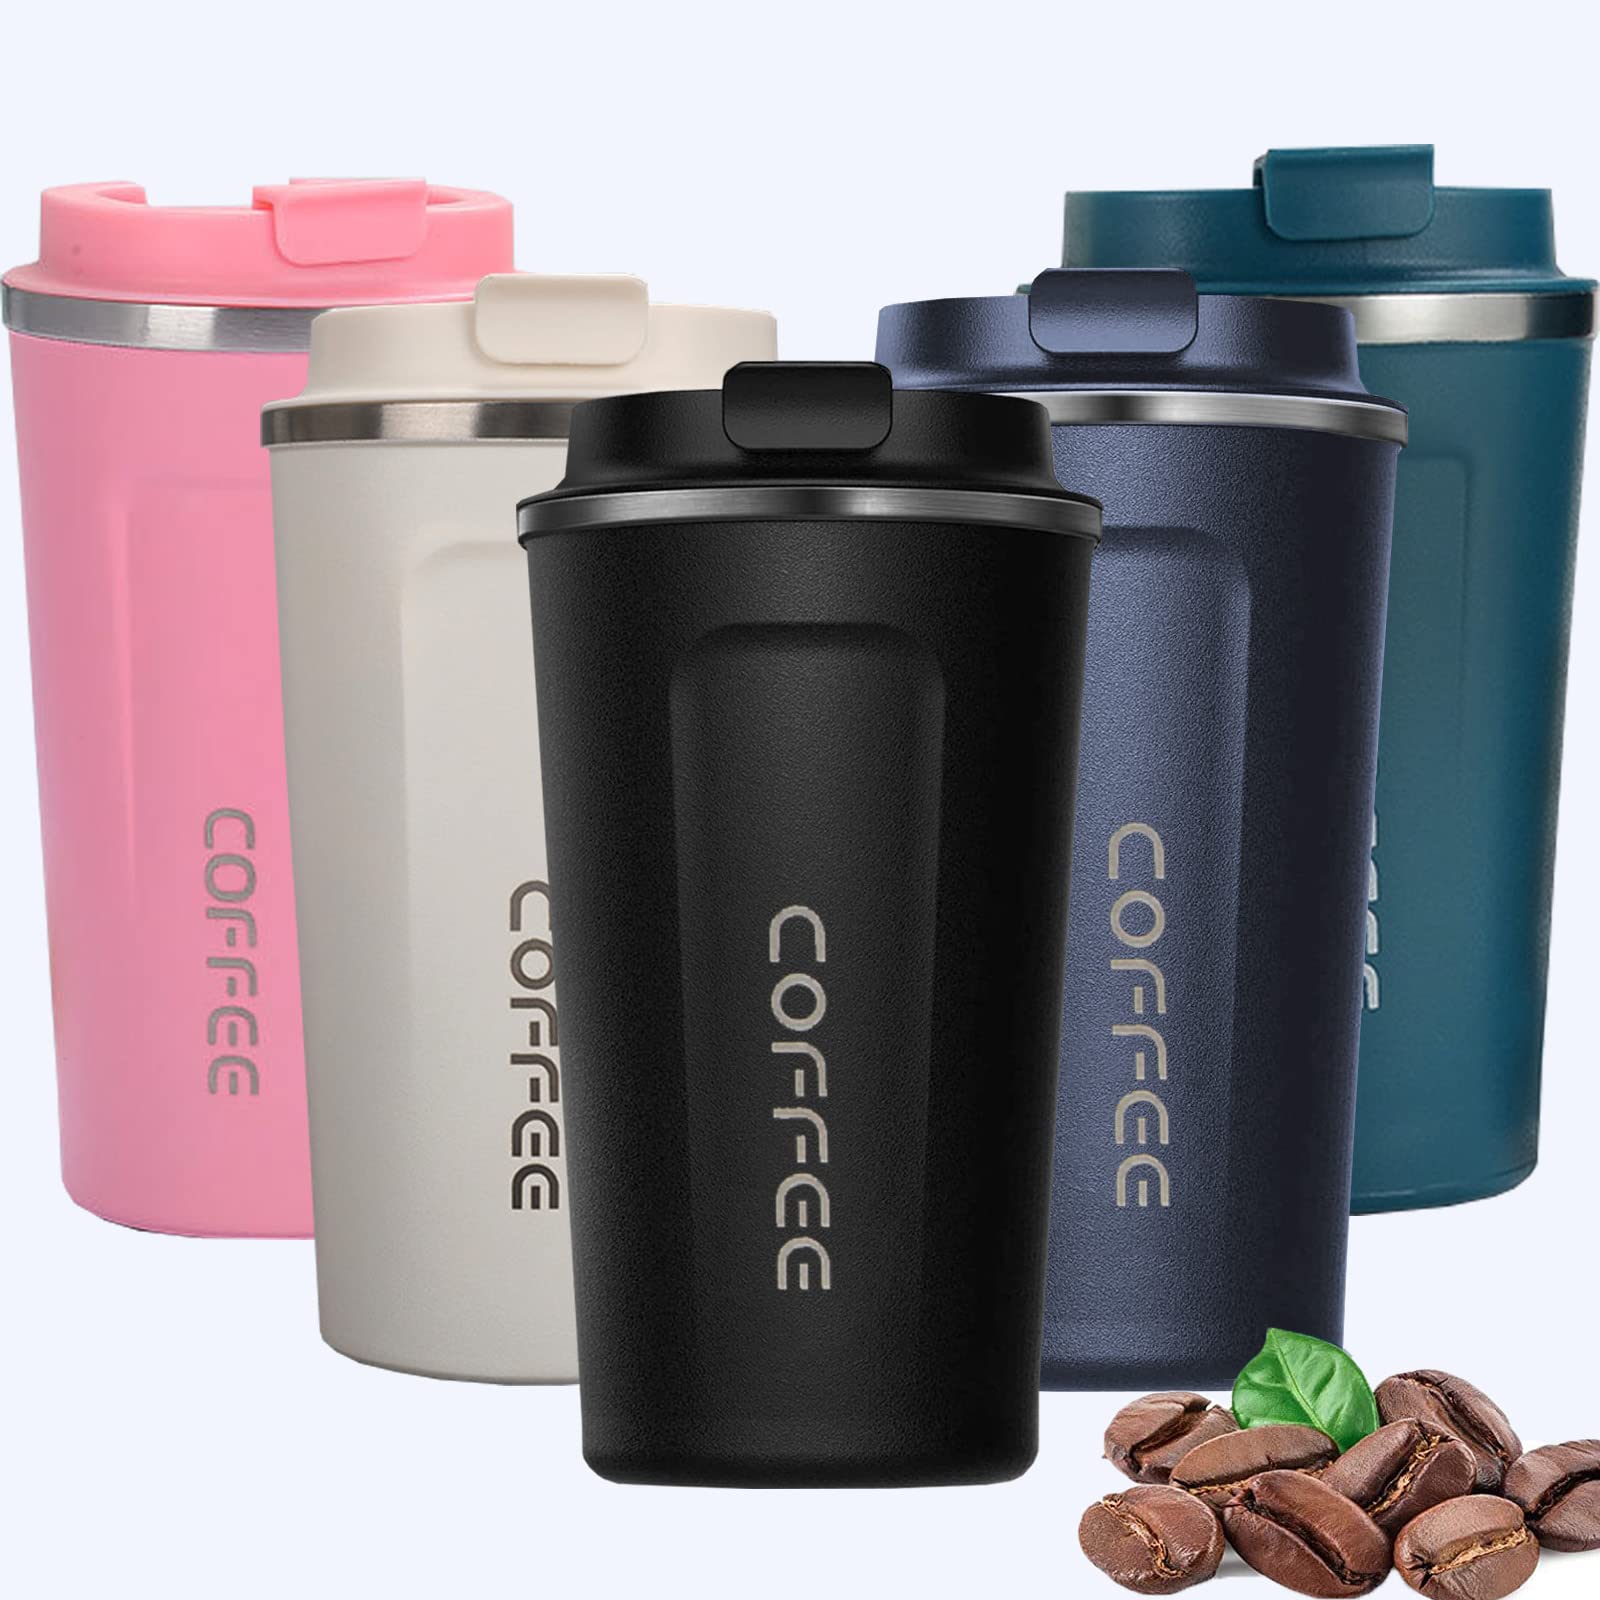 Travel Mug,Insulated Coffee Mug, Travel Mug Spill, Stainless Steel Vacuum Insulated Tumbler, Small Water Bottle with Lid, Double Wall Leak-Proof Thermos Mug for Keep Hot/Ice Coffee,Tea (Black, 380ml)